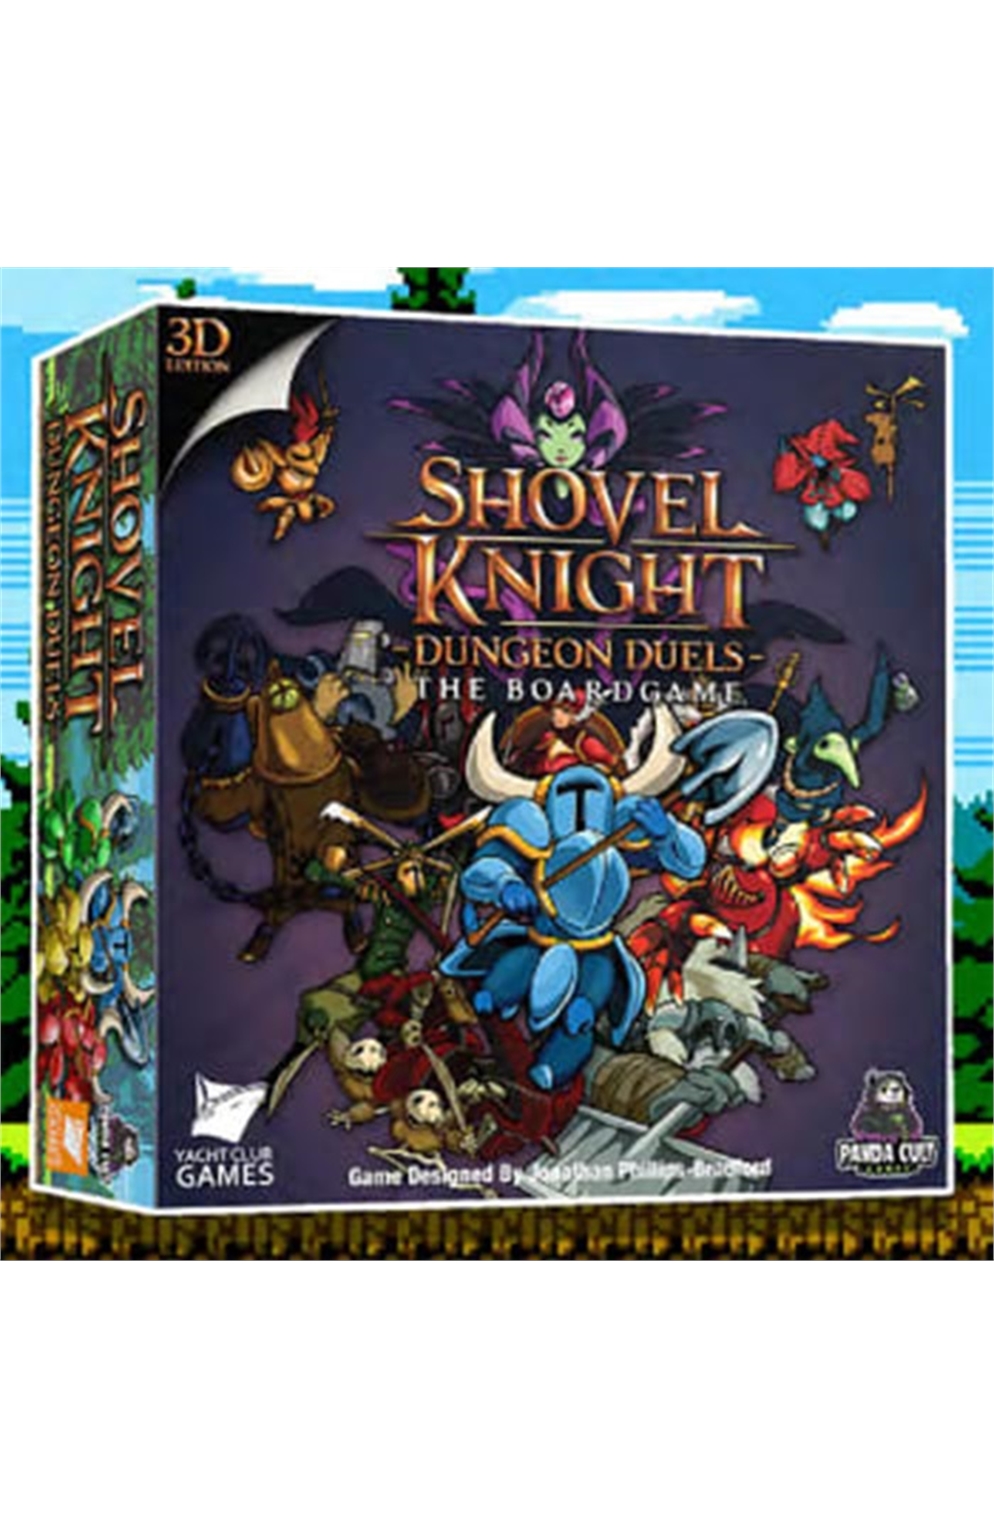 Shovel Knight Dungeon Duels: 3D Edition